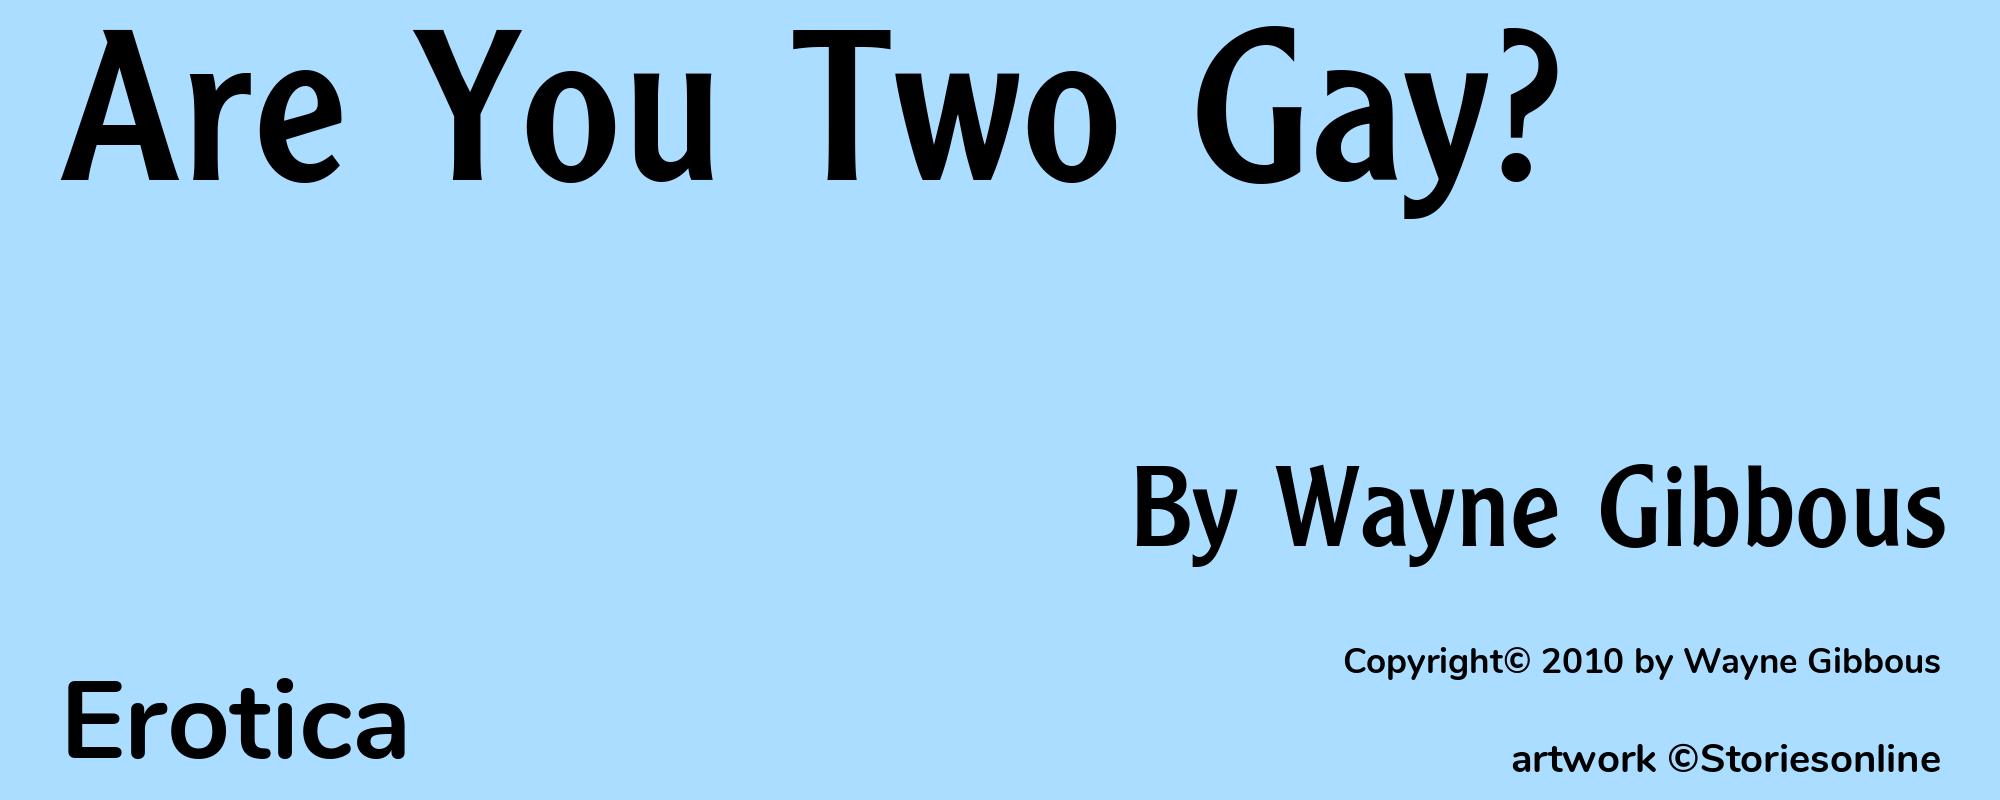 Are You Two Gay? - Cover